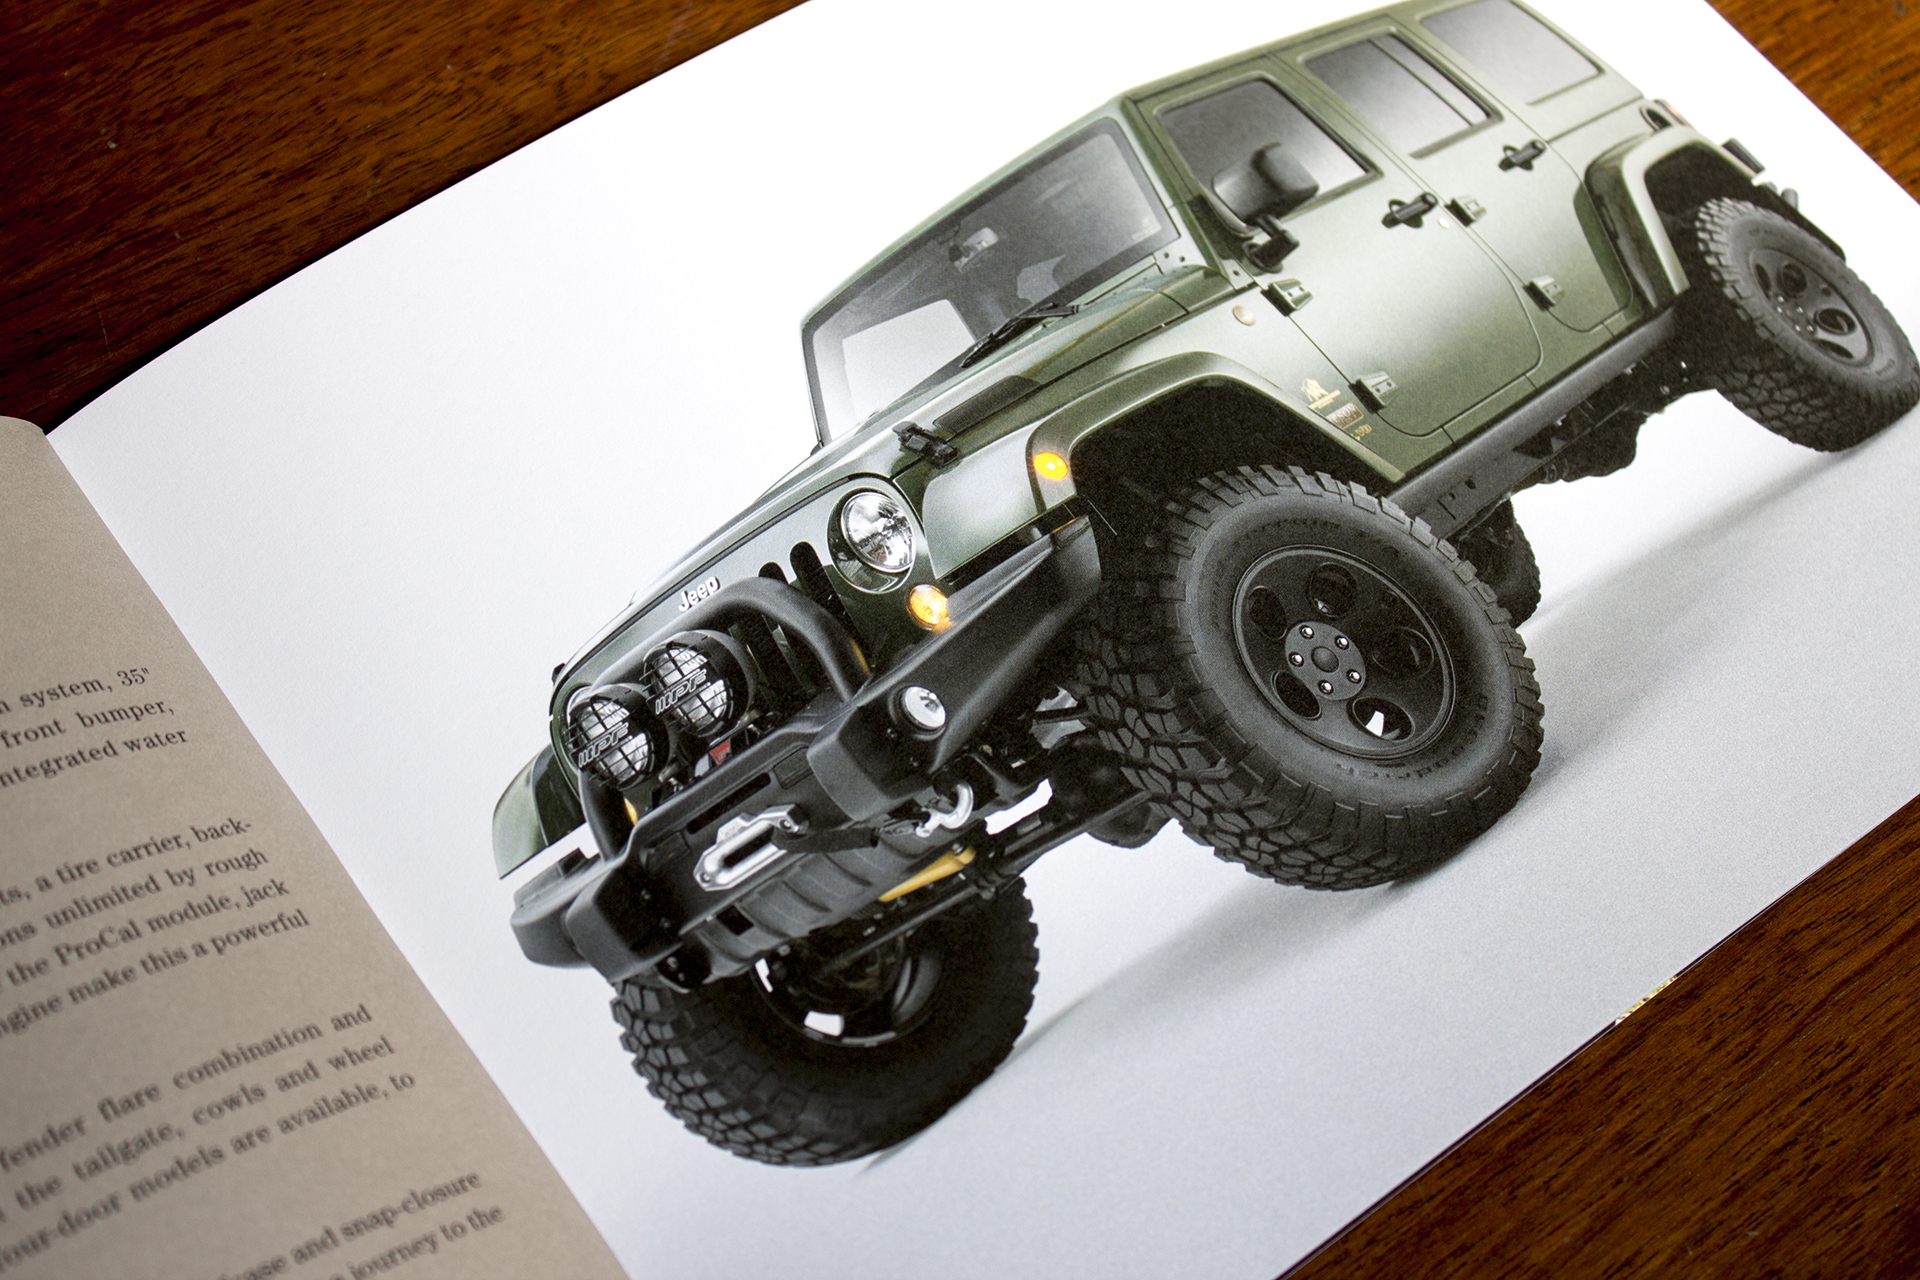 A page in the brochure showing a brightly photographed vehicle